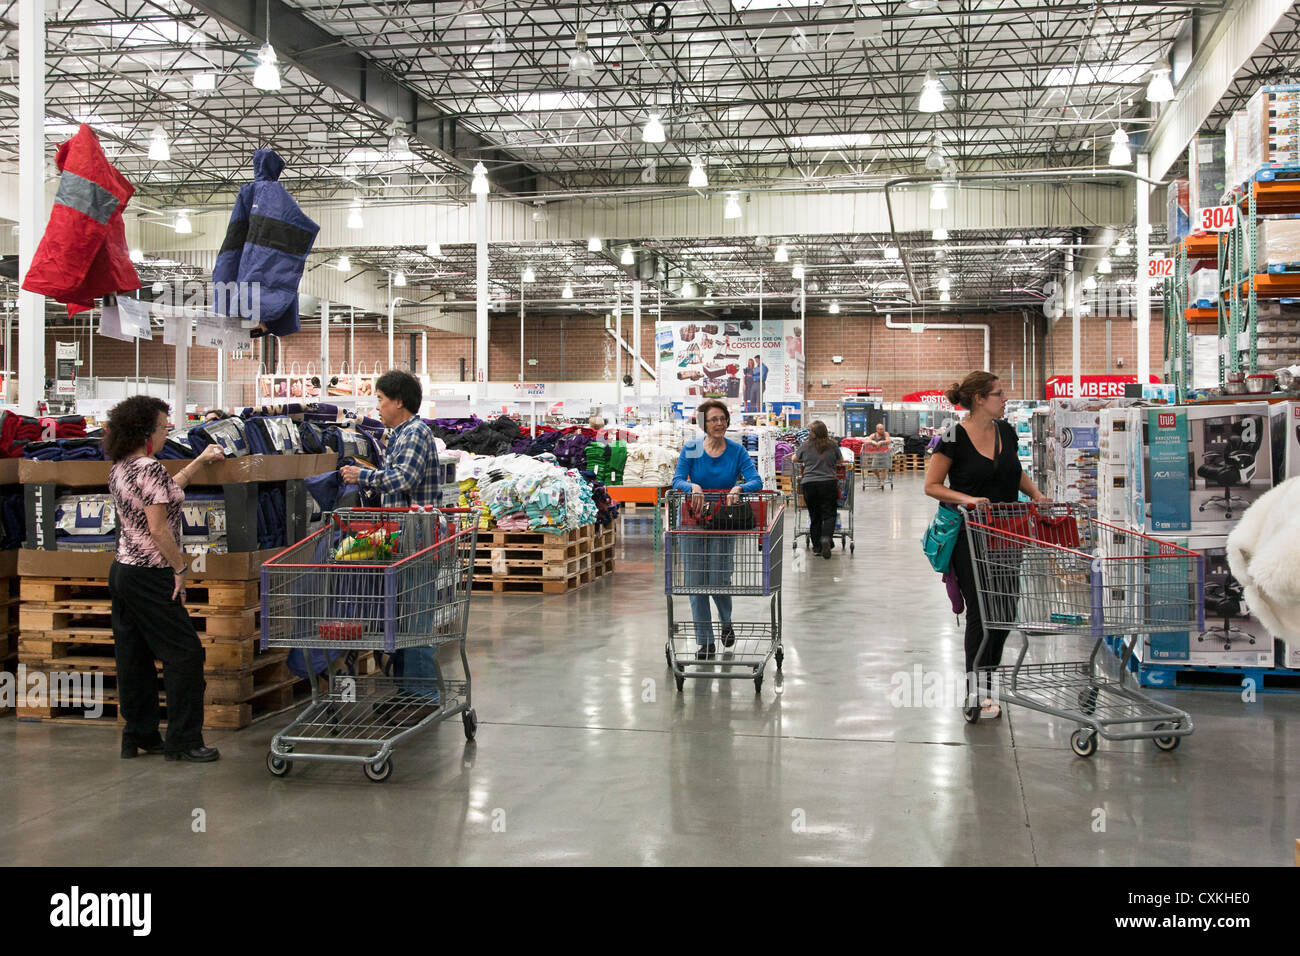 customers with large shopping carts wander clothing & dry goods sections of big box warehouse chain retailer Costco USA Stock Photo